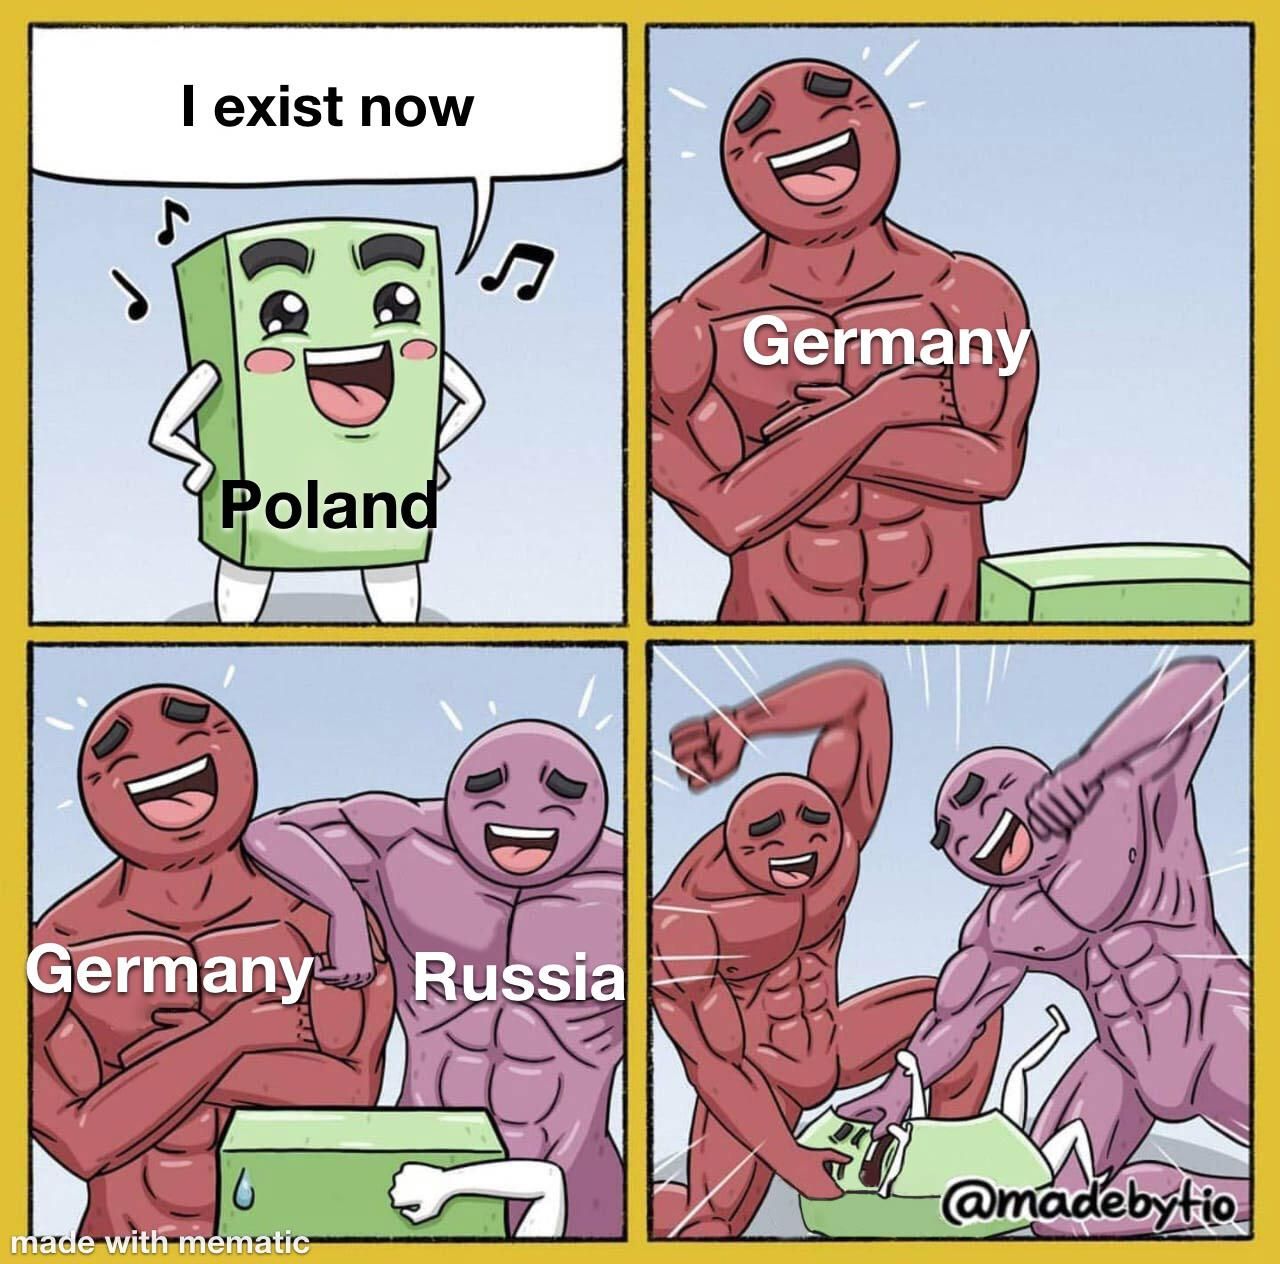 At least they held off the Russians the 1st time